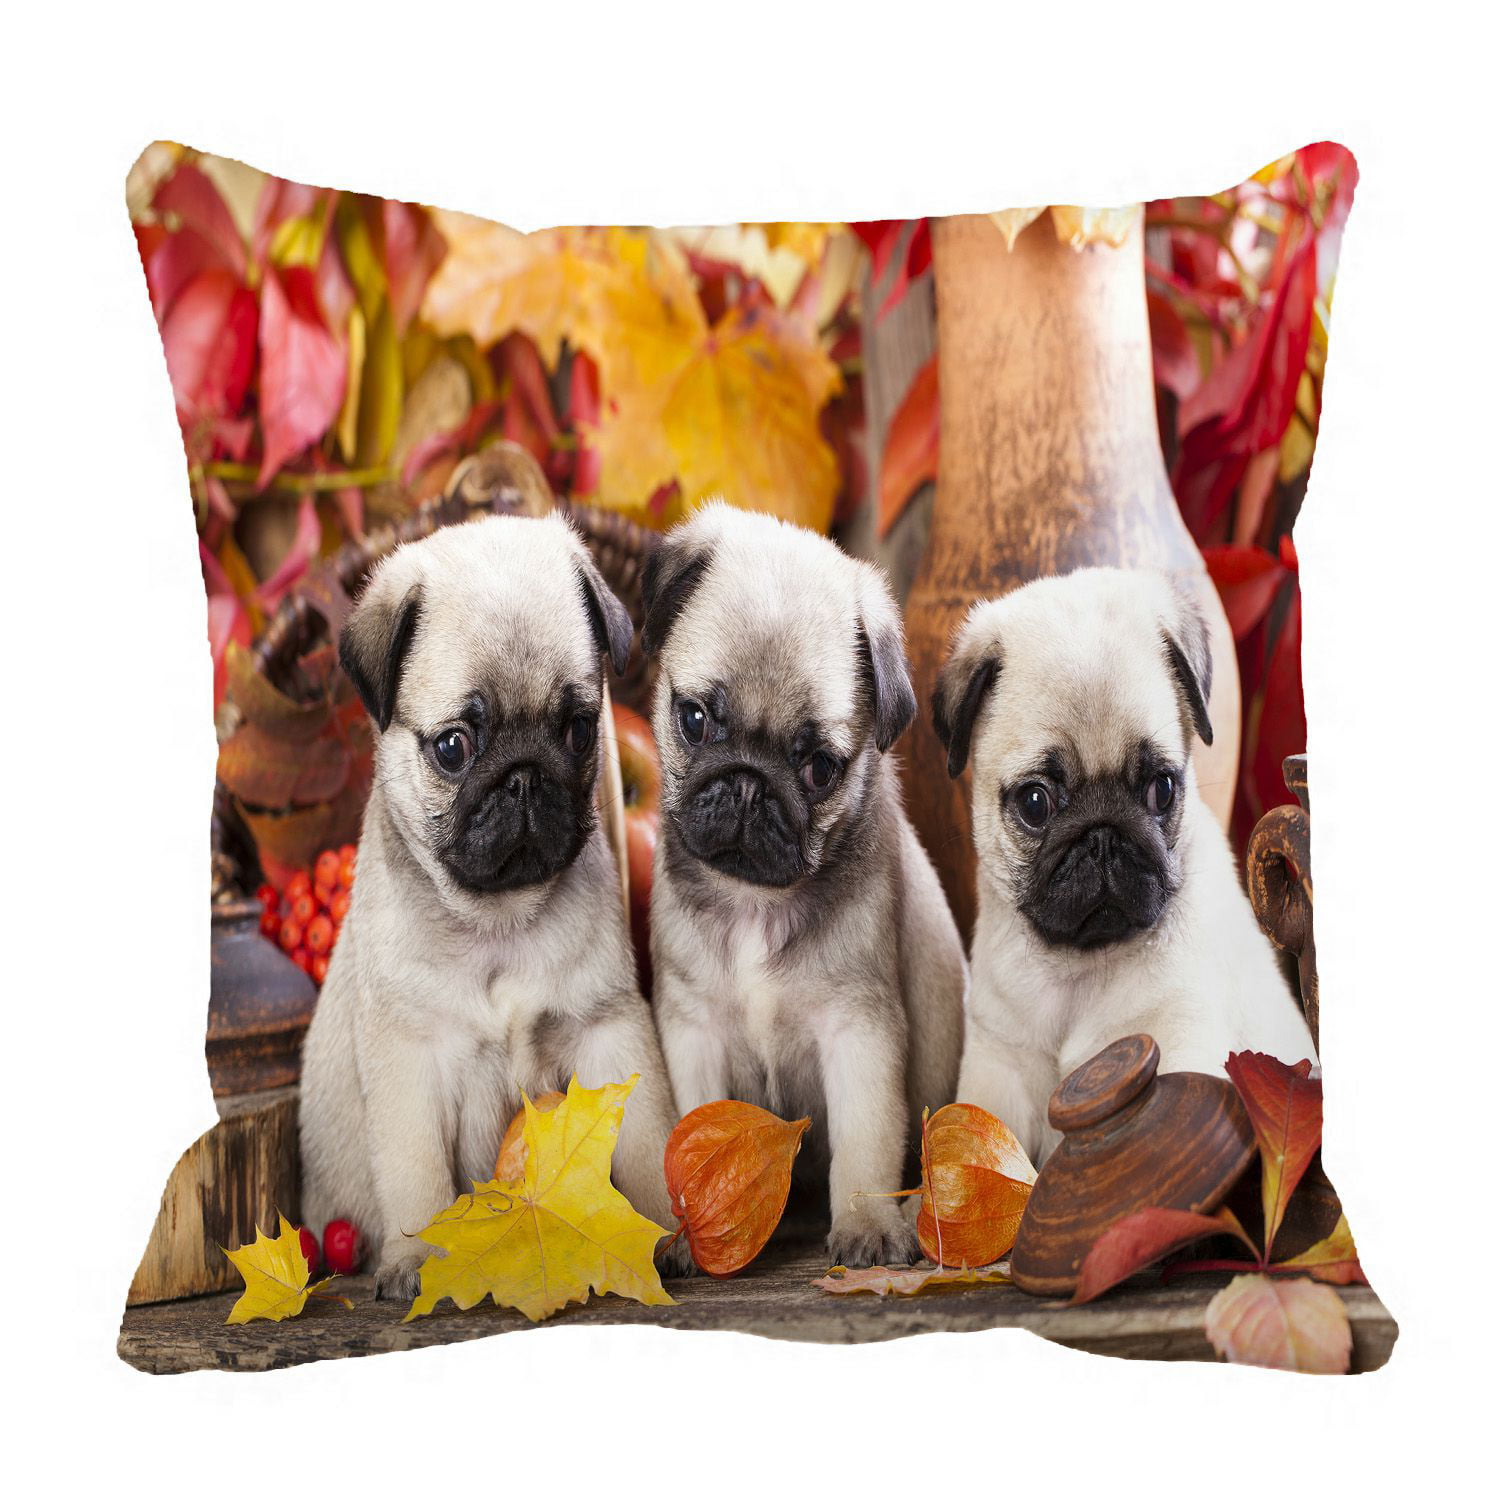 Pug Dog Pet Pillow Case Cushion Cover 18 x 18 inches 